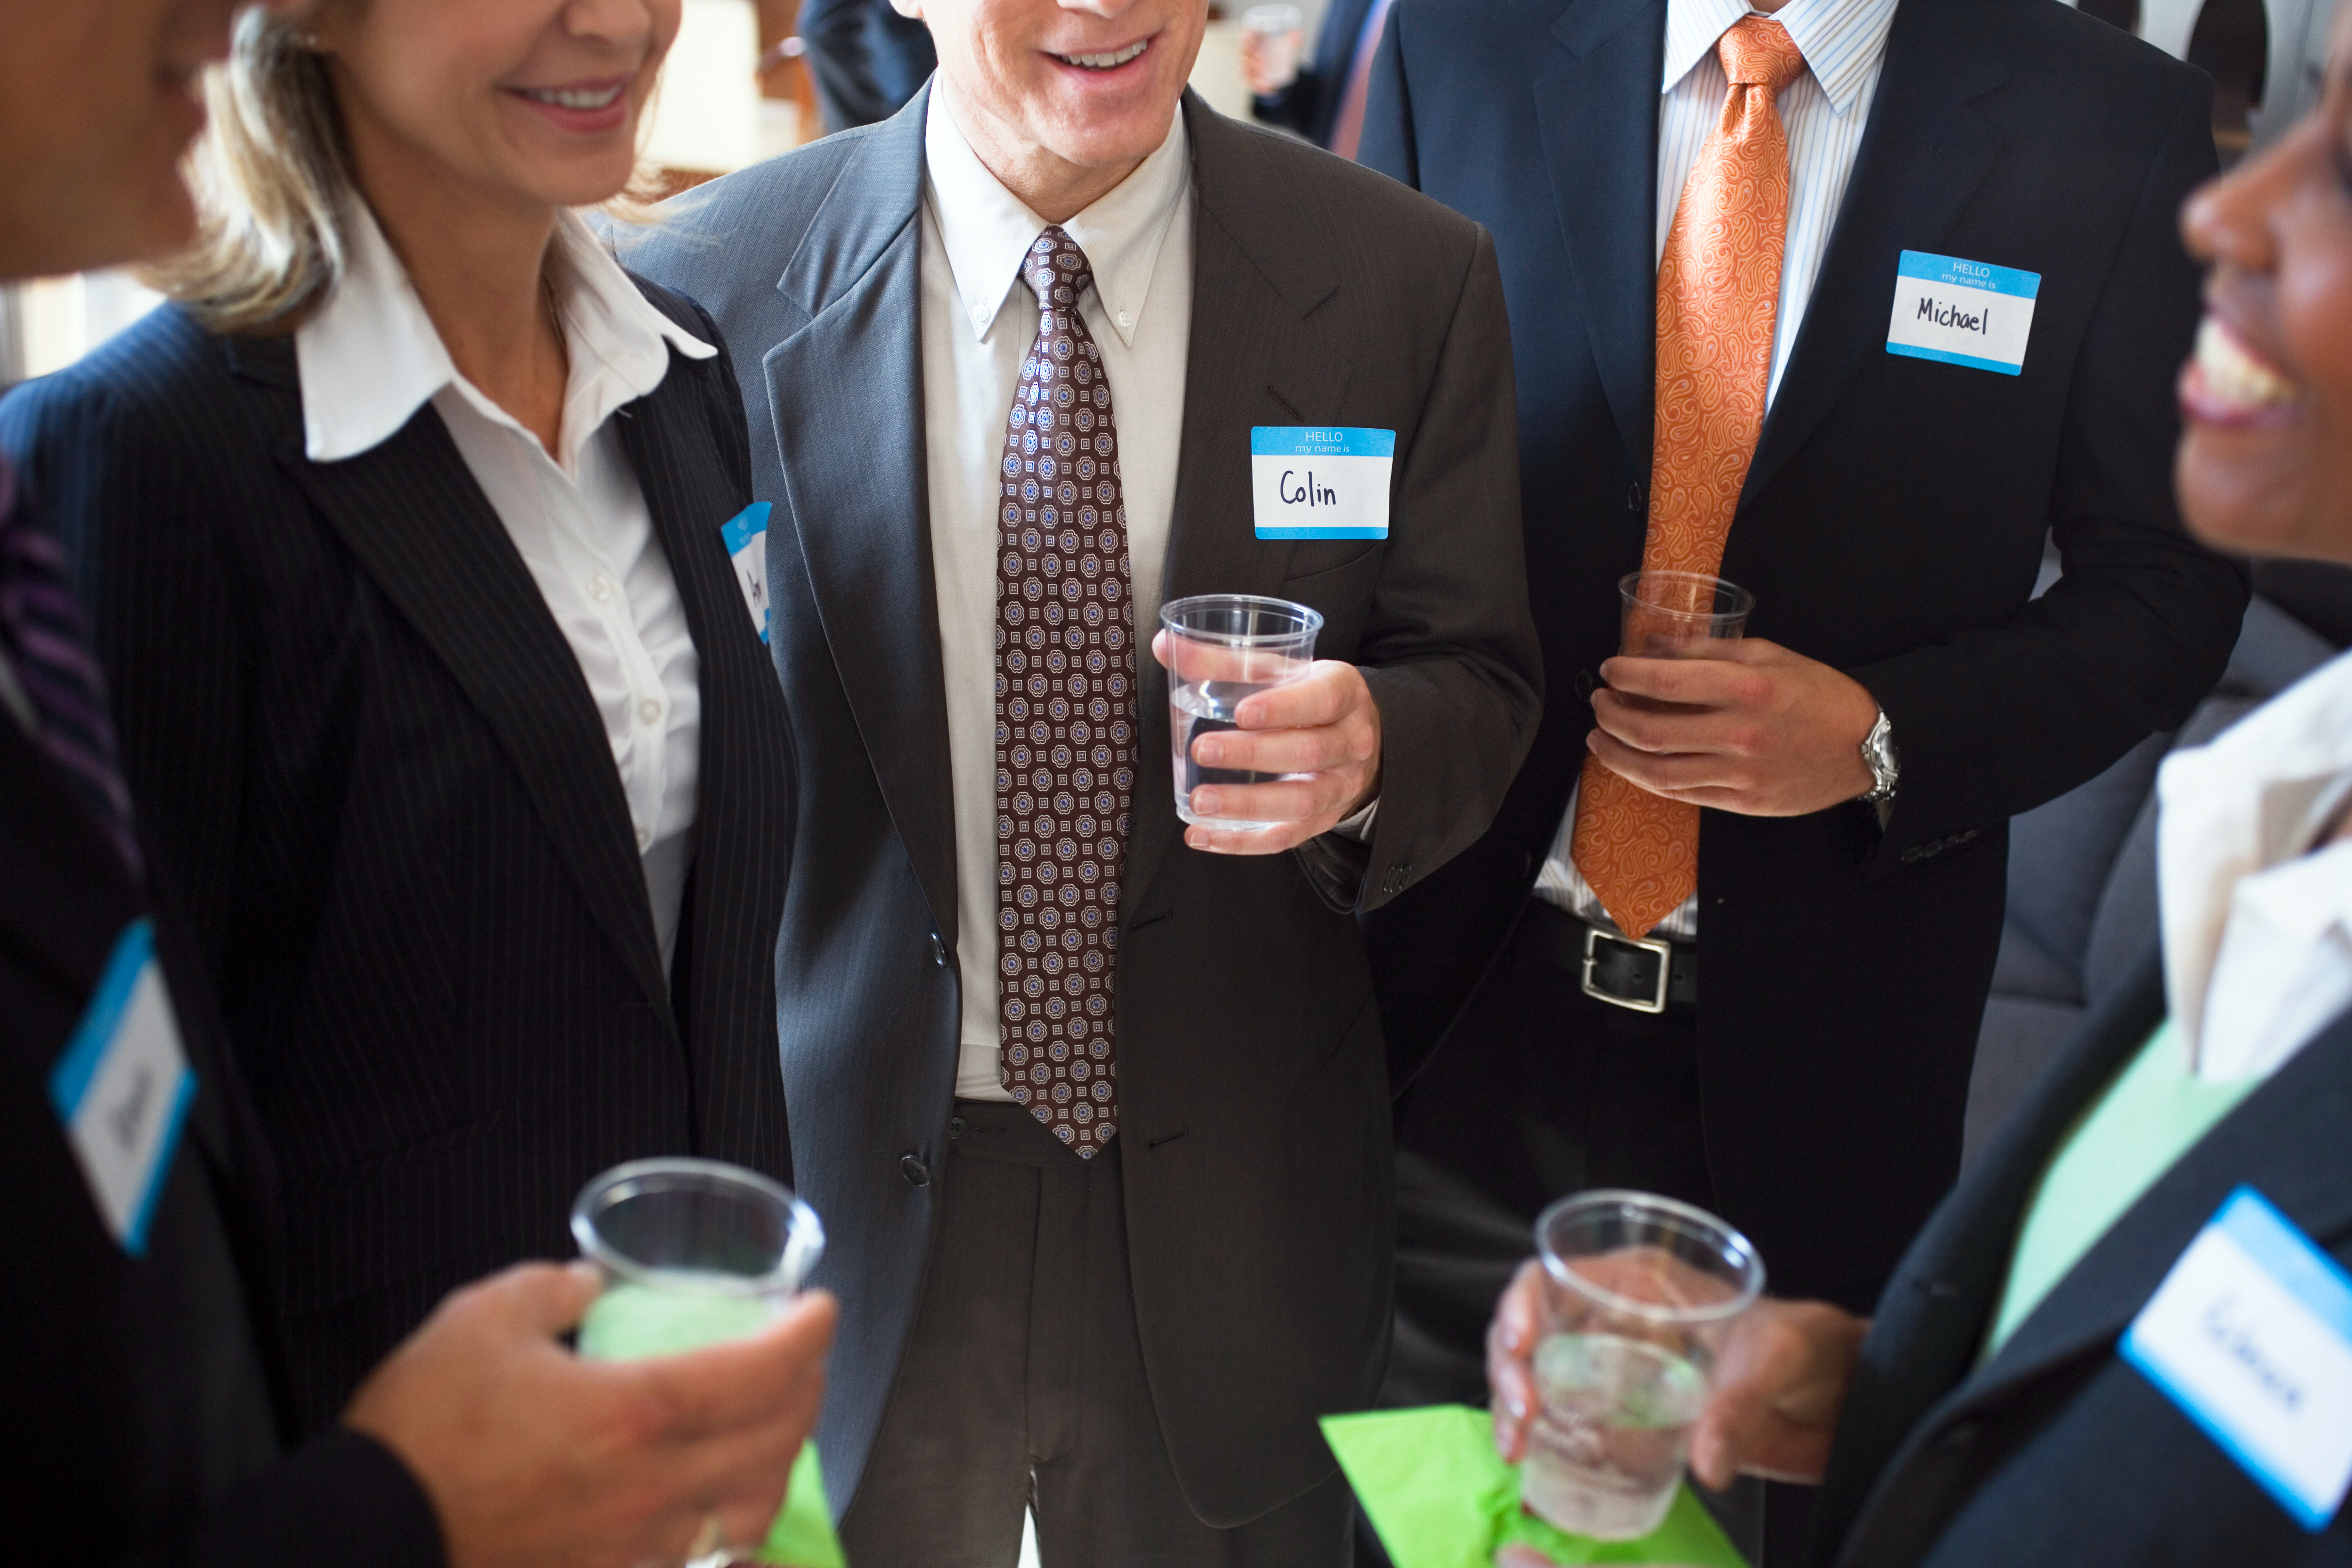 5 No-Fail Ways to Introduce Yourself at a Networking Event